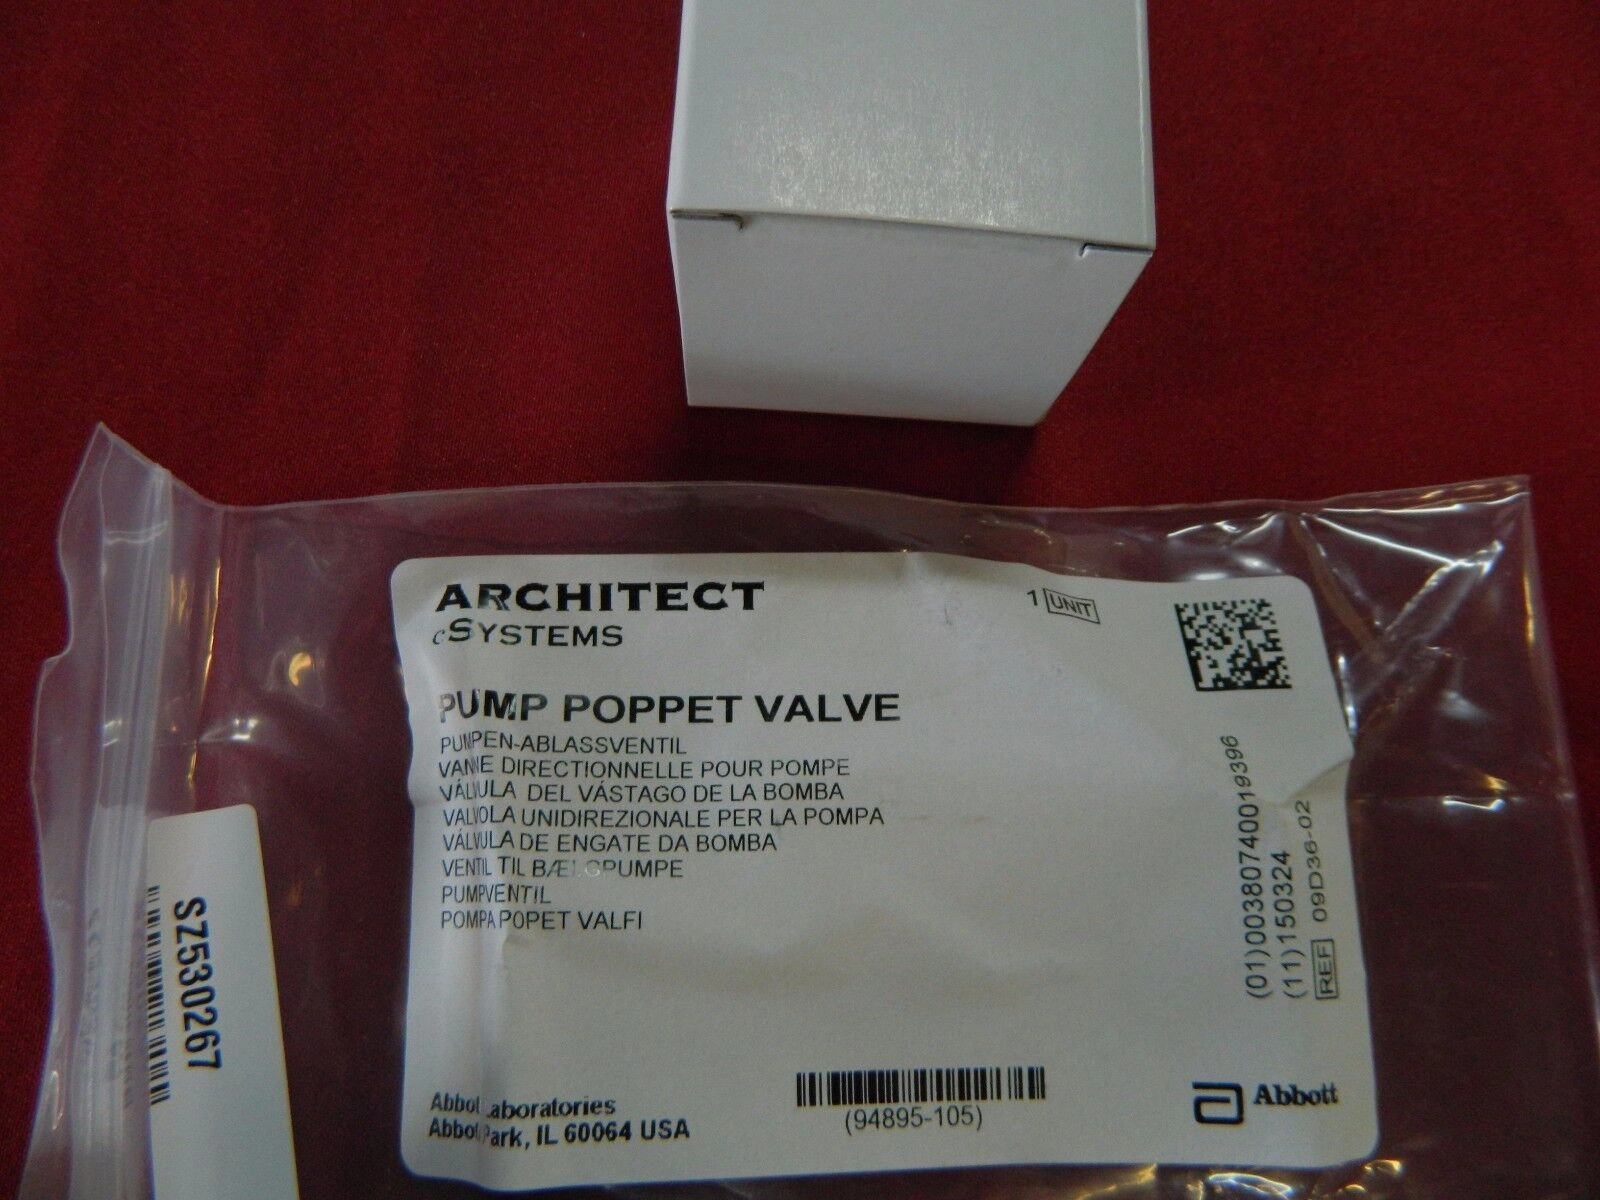 PUMP POPPET VALVE P/N 09D36-02 FOR ARCHITECT cSYST